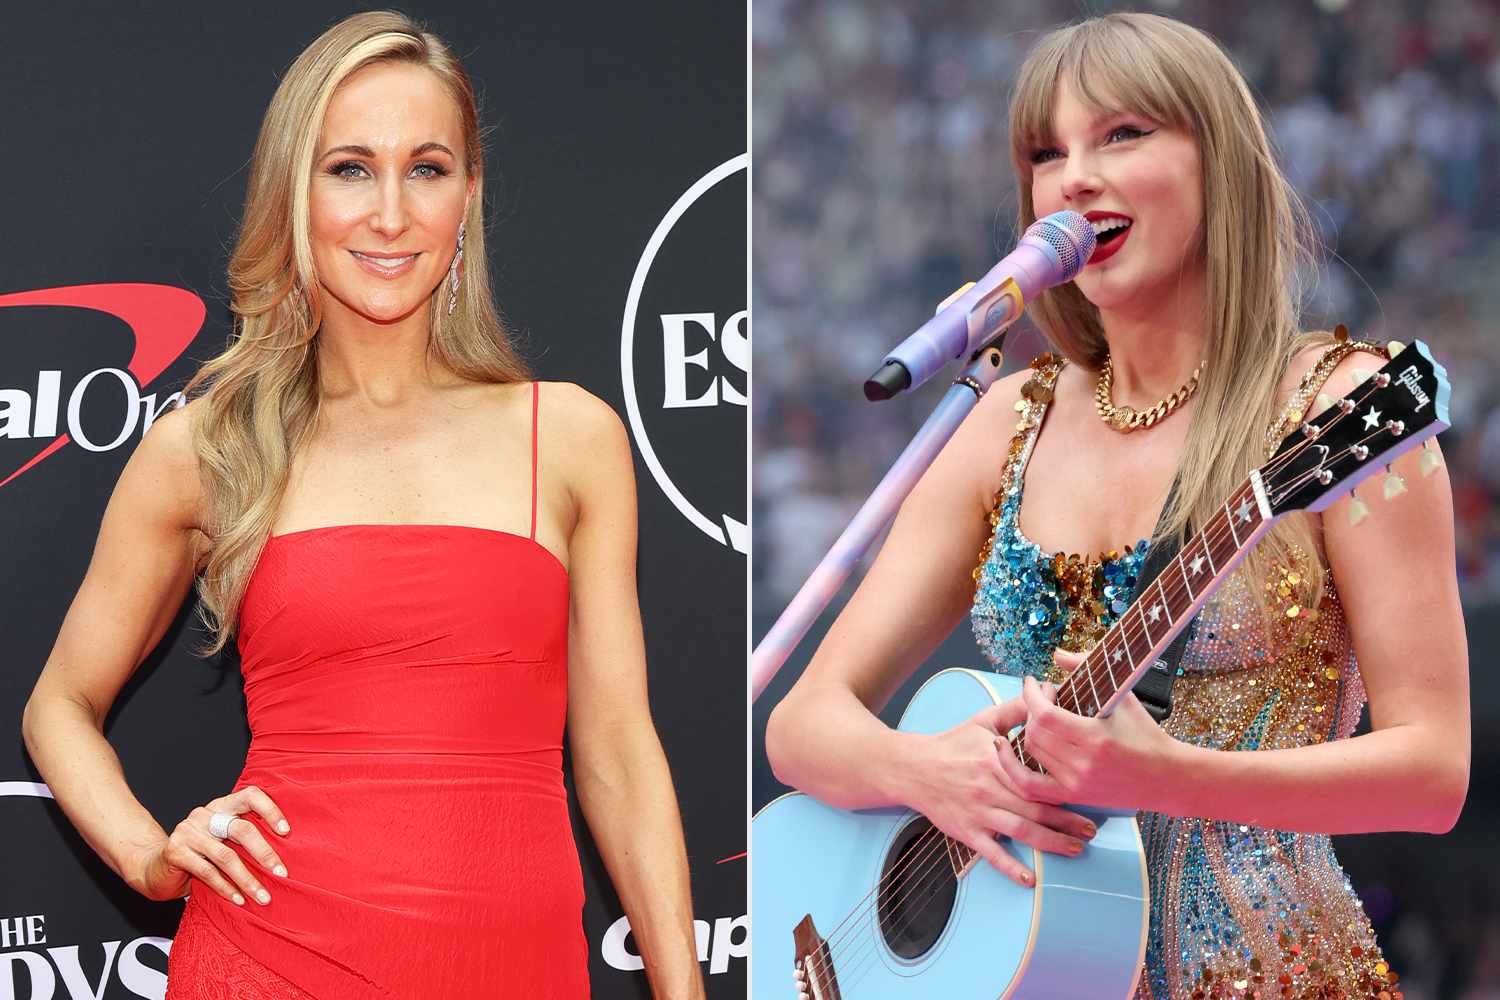 Nikki Glaser jokes that seeing Taylor Swift live is like doing cocaine